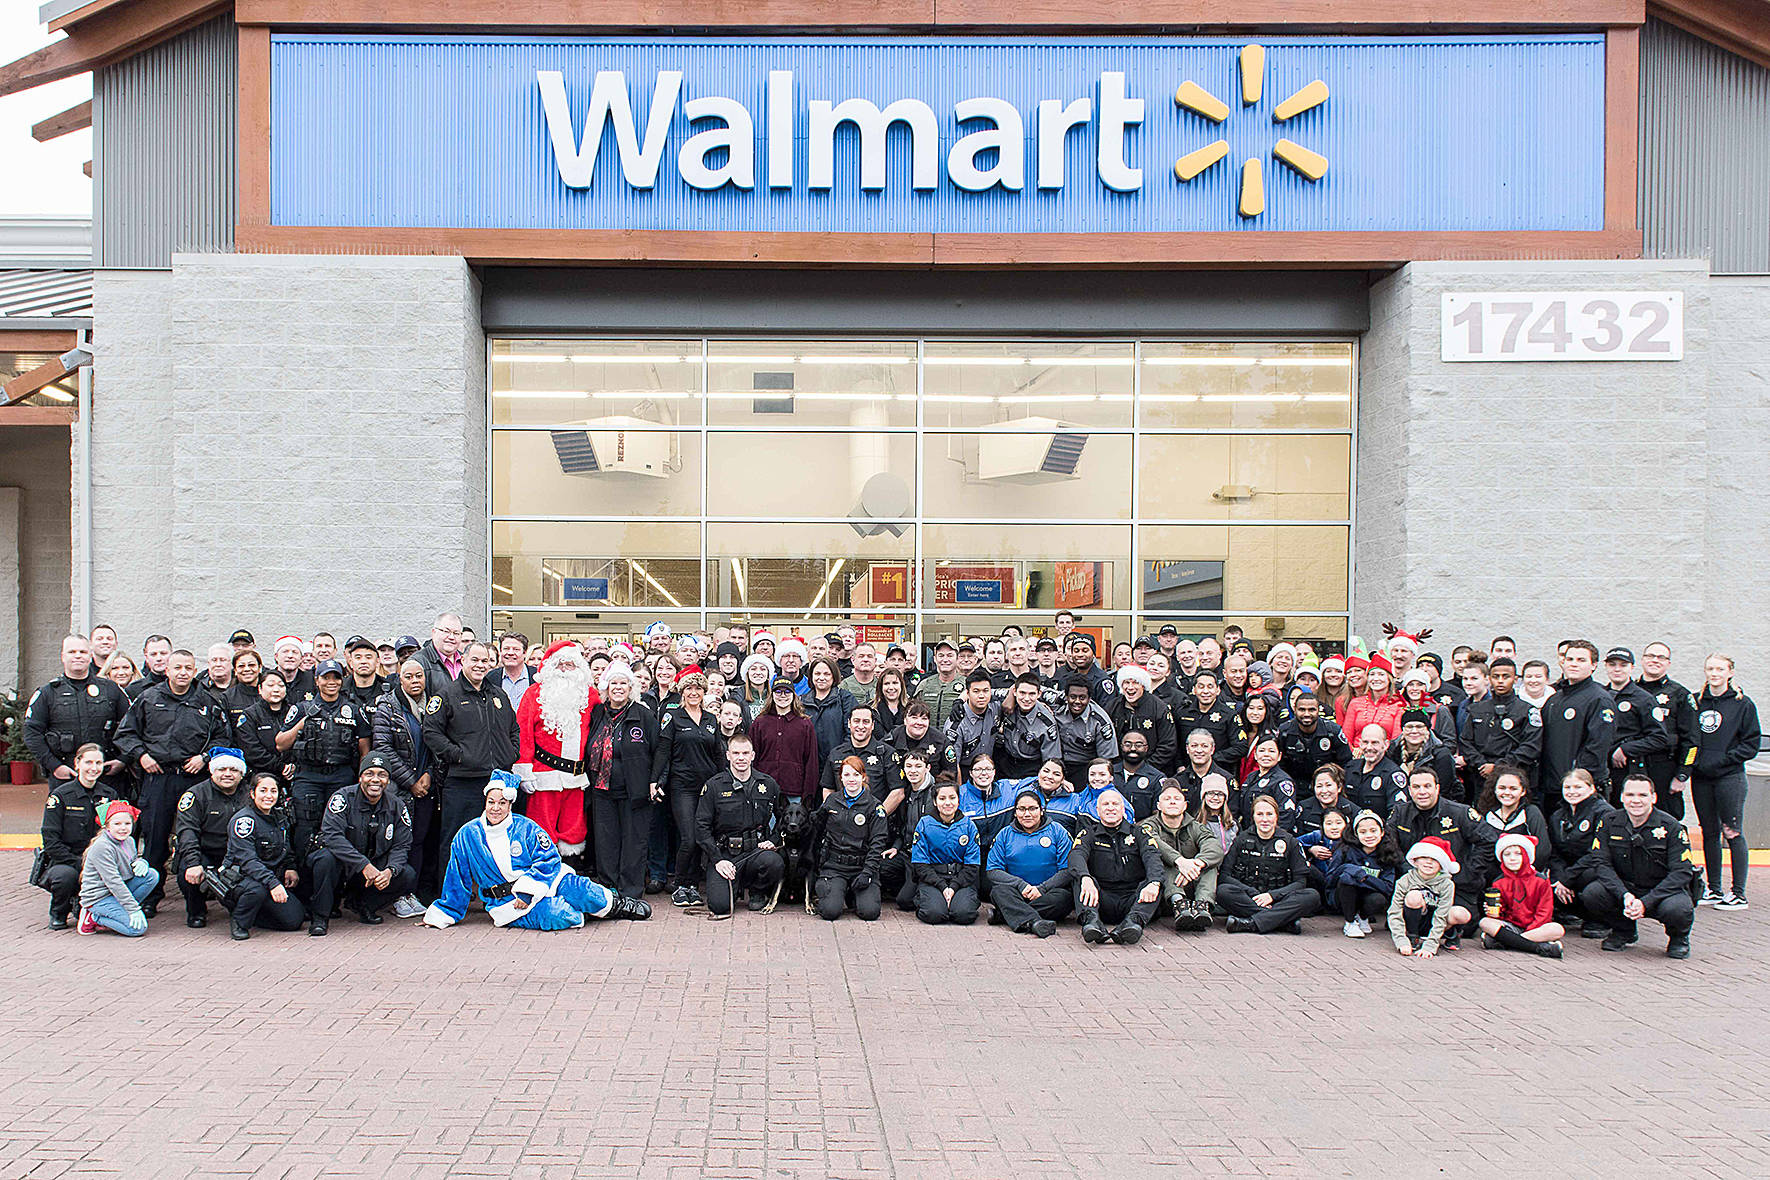 Shop With A Cop took place at the Covington Walmart where more than 600 children participated in the event and about 135 law enforcement personnel volunteered their time. Photo courtesy of Angela Van Liew